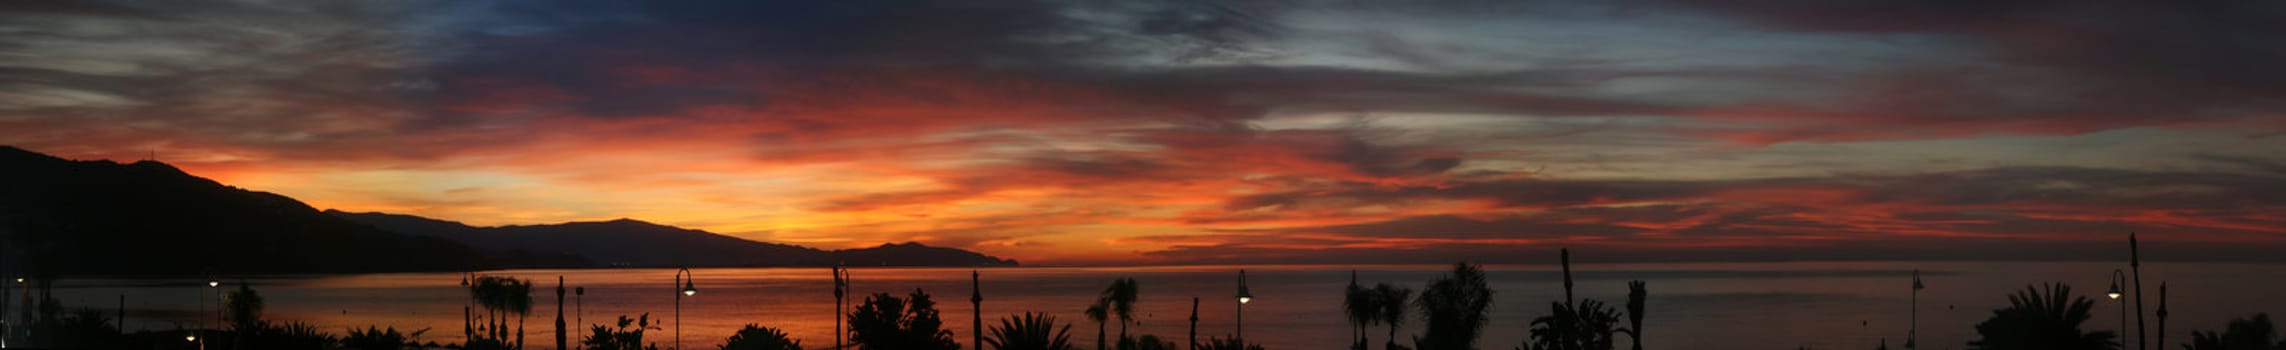 A very wide panoramic image showing a pretty and spectacular sunrise over sea and mountains